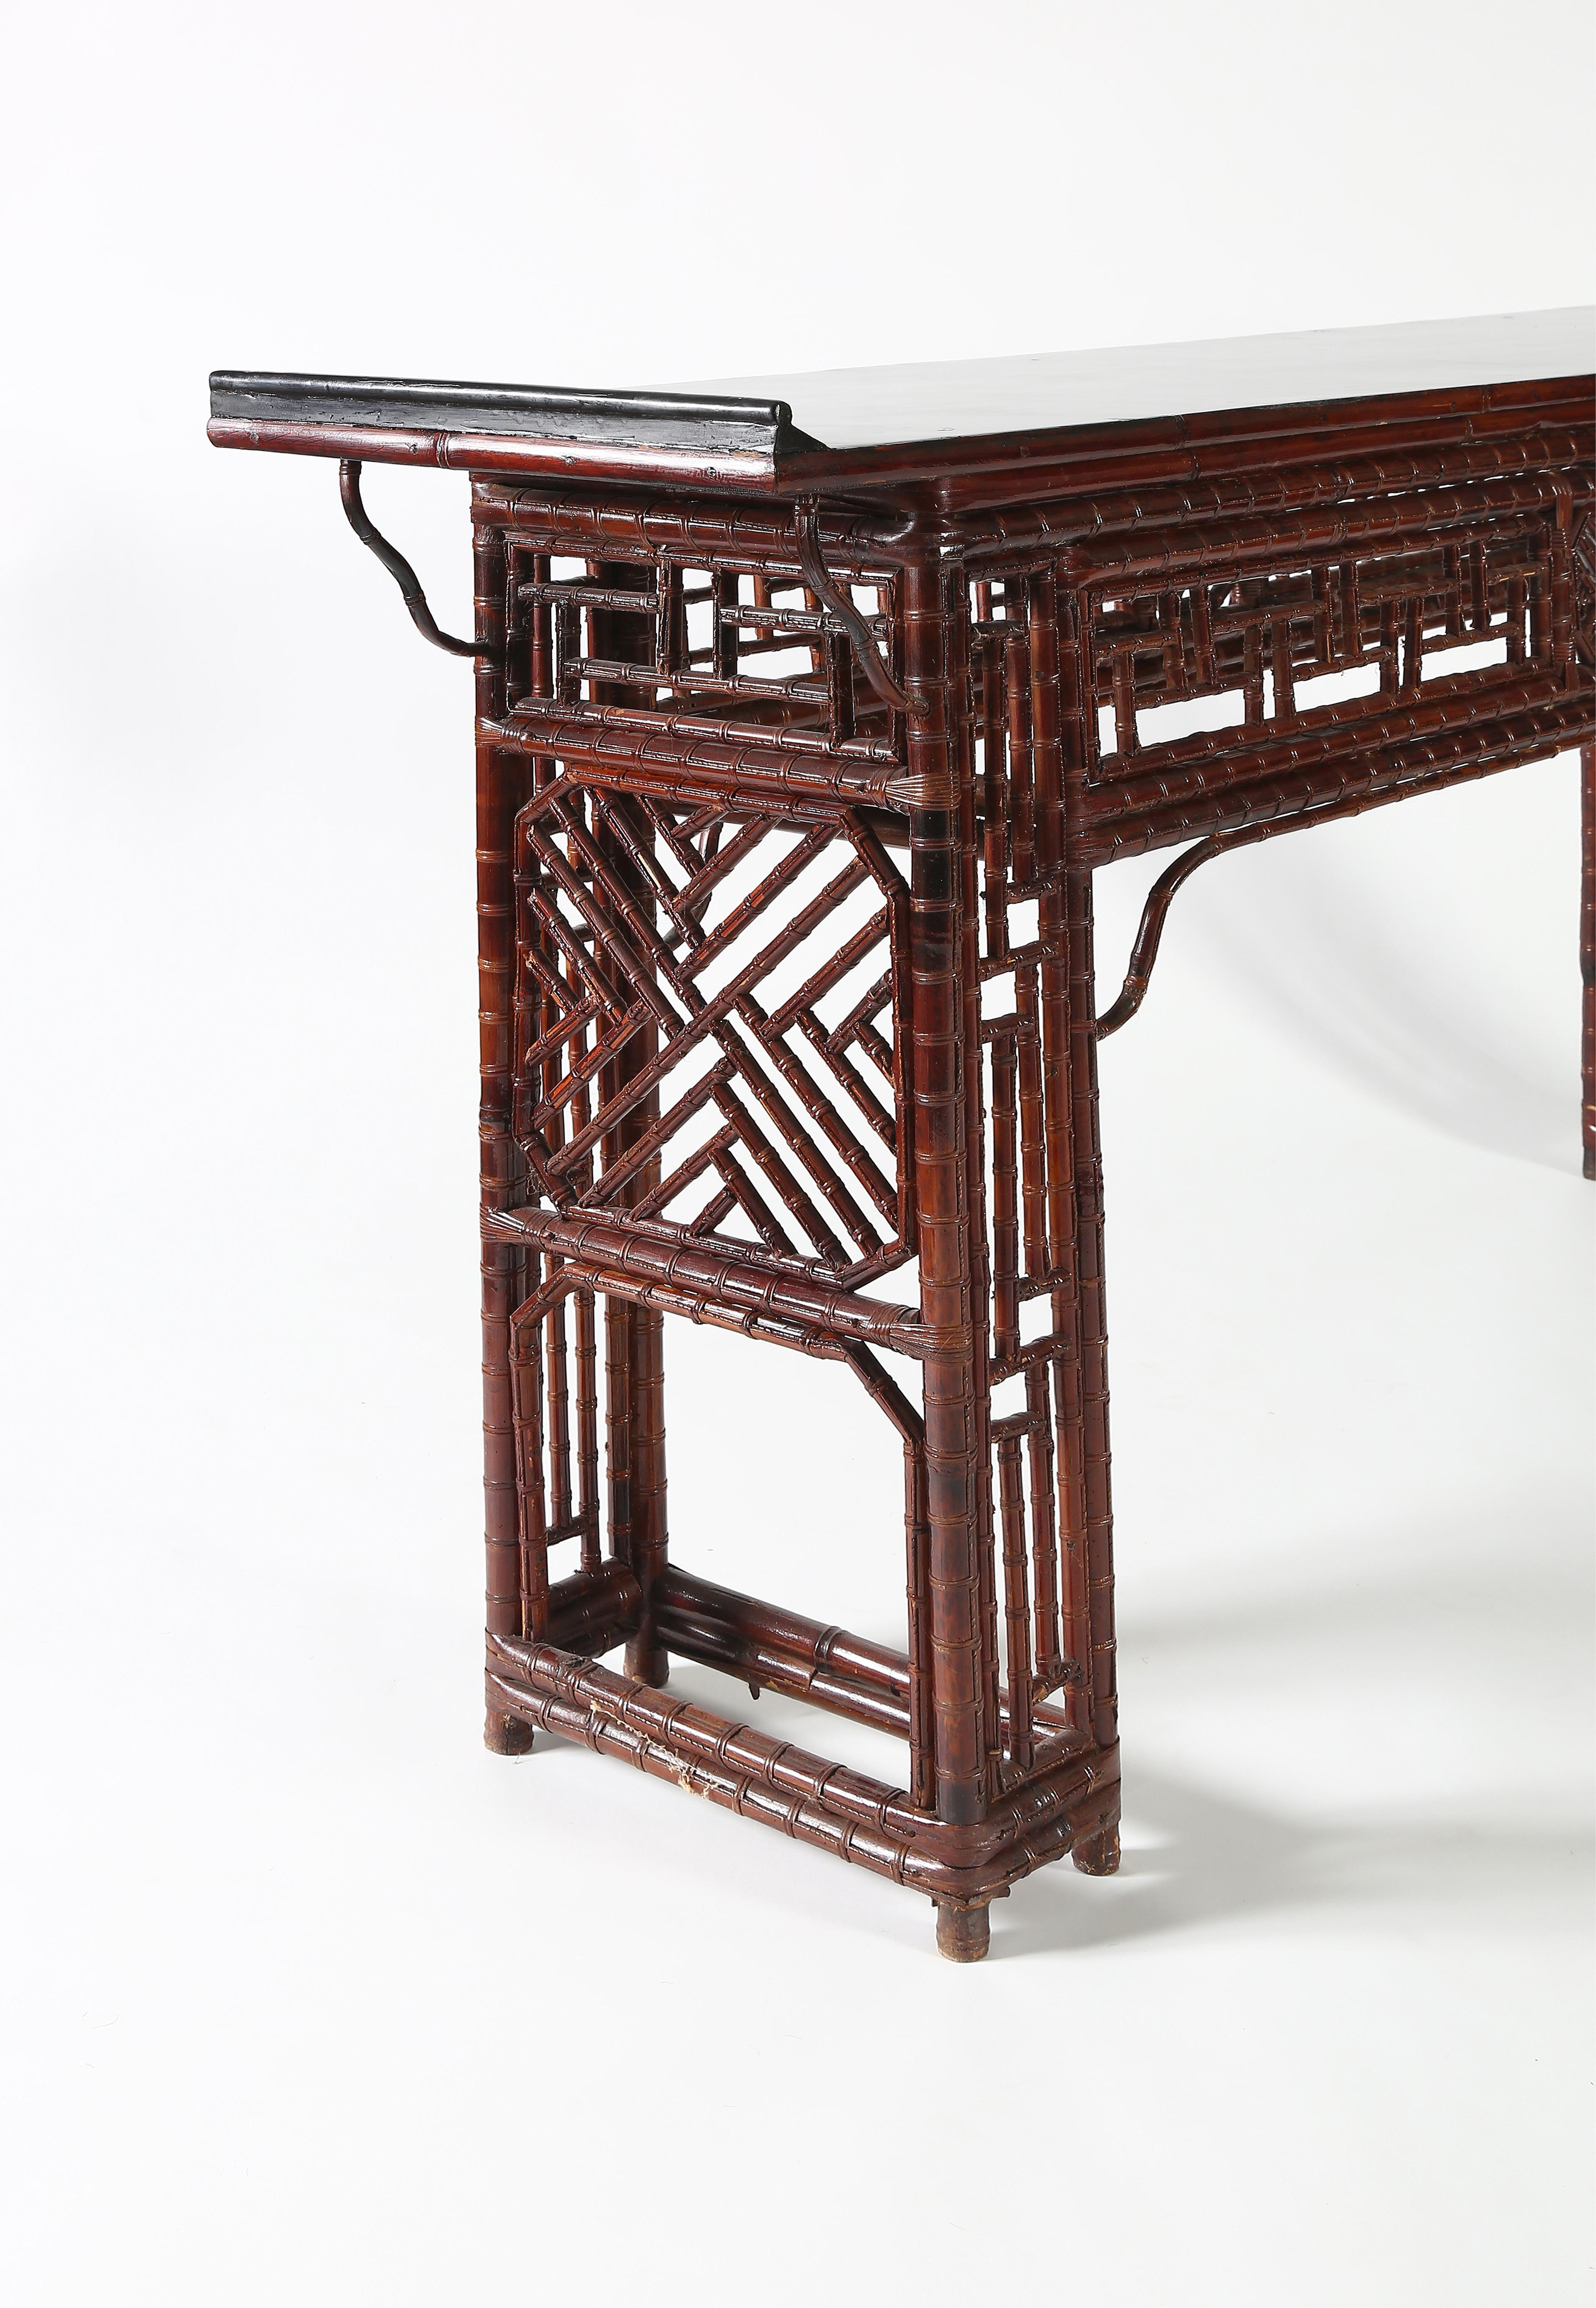 The table with a black lacquer flank top ending in everted flanges, above wrapped around stretchers, fretwork paneled apron with attached shaped spandrels, supported on recessed legs consisting of posts enclosing open lattice panels and braced with